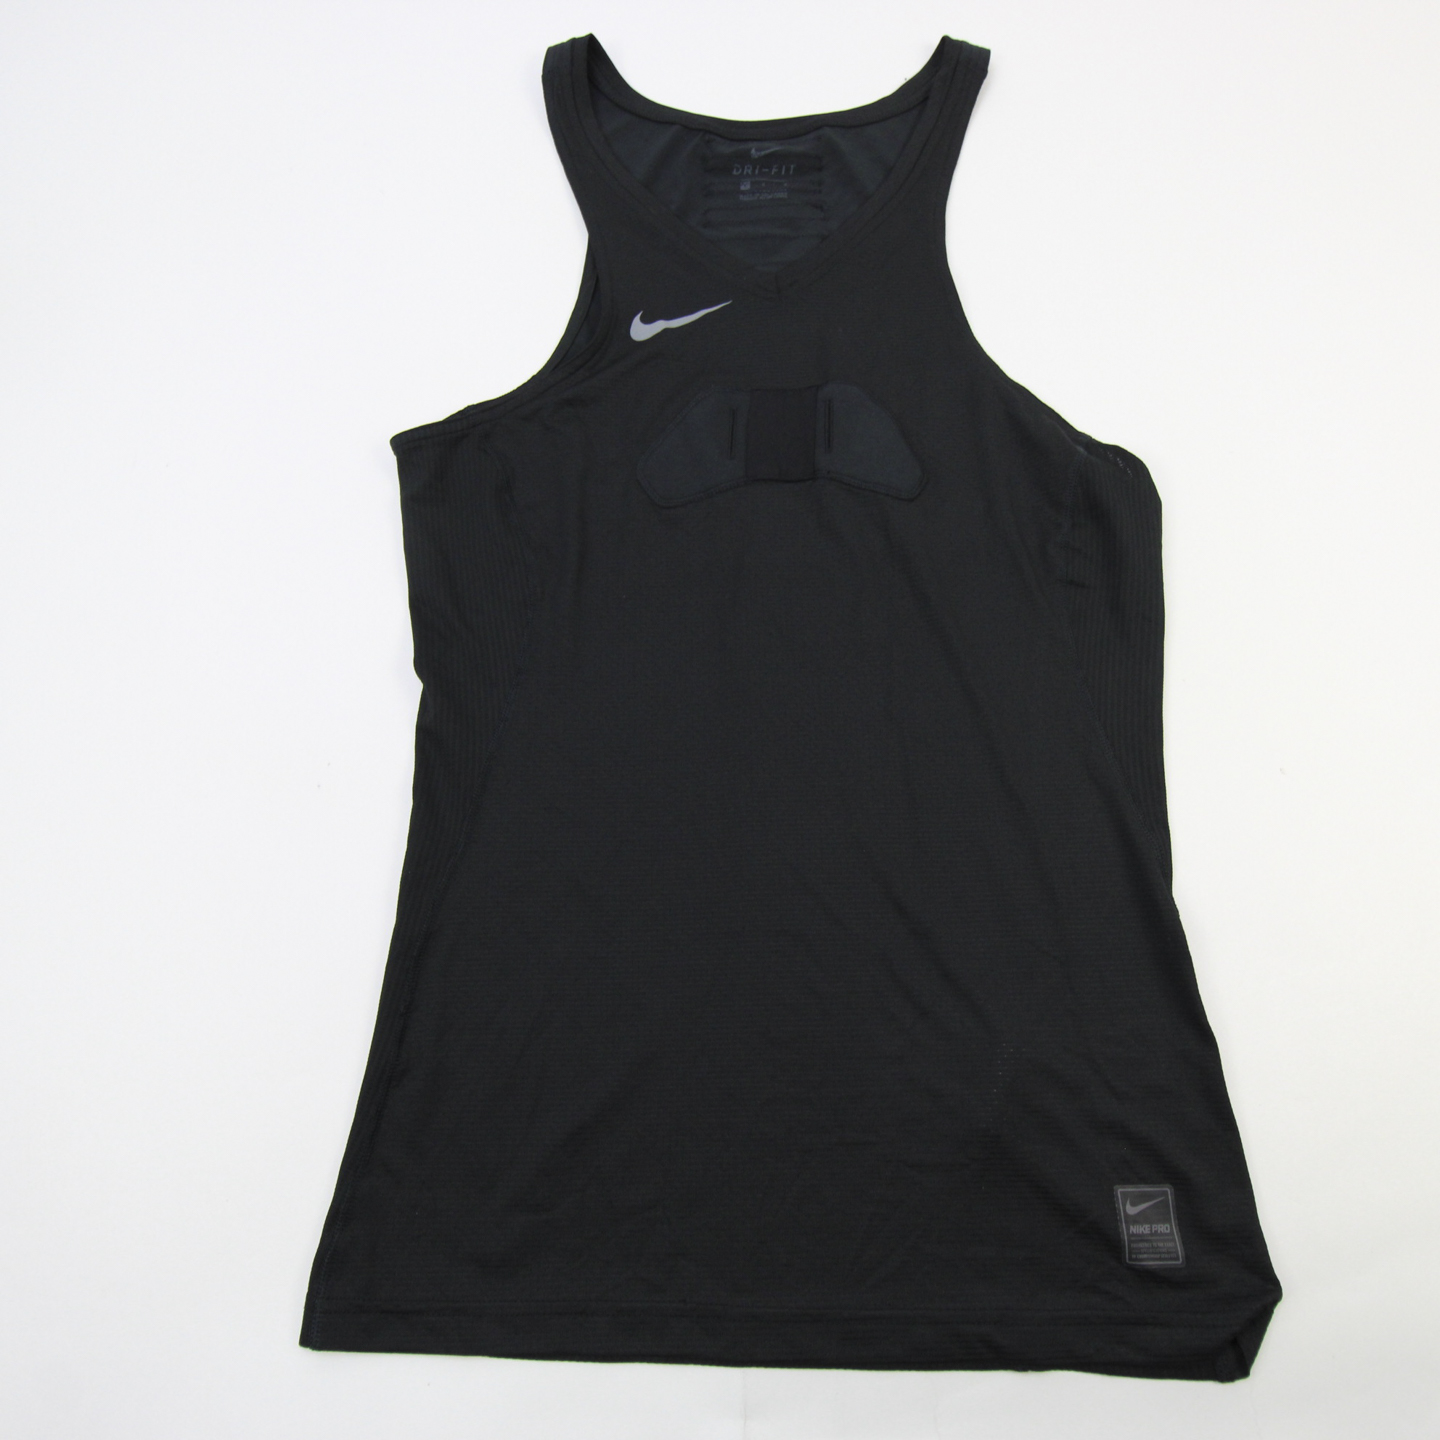 NIKE NBA PRO Hyperstrong Basketball Compression Tank Top (MEN'S